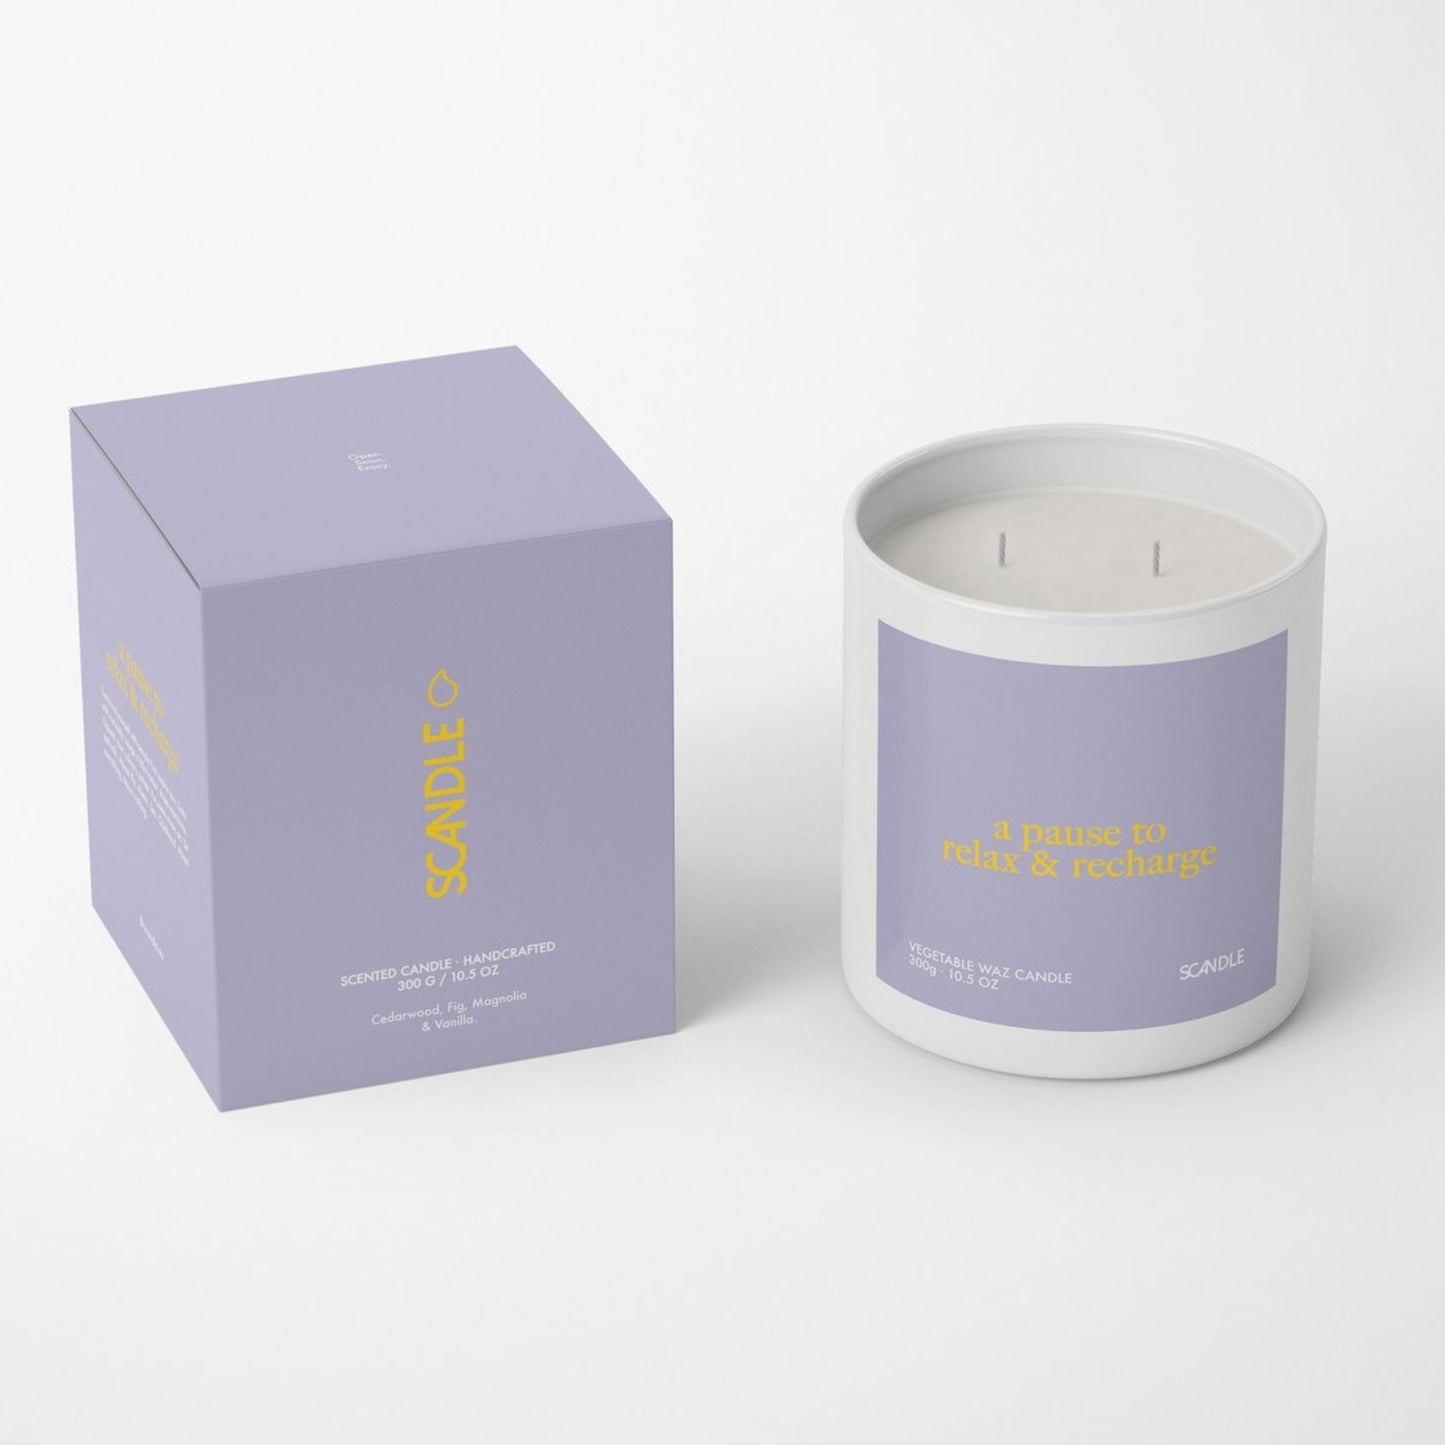 Scandle Scented candle